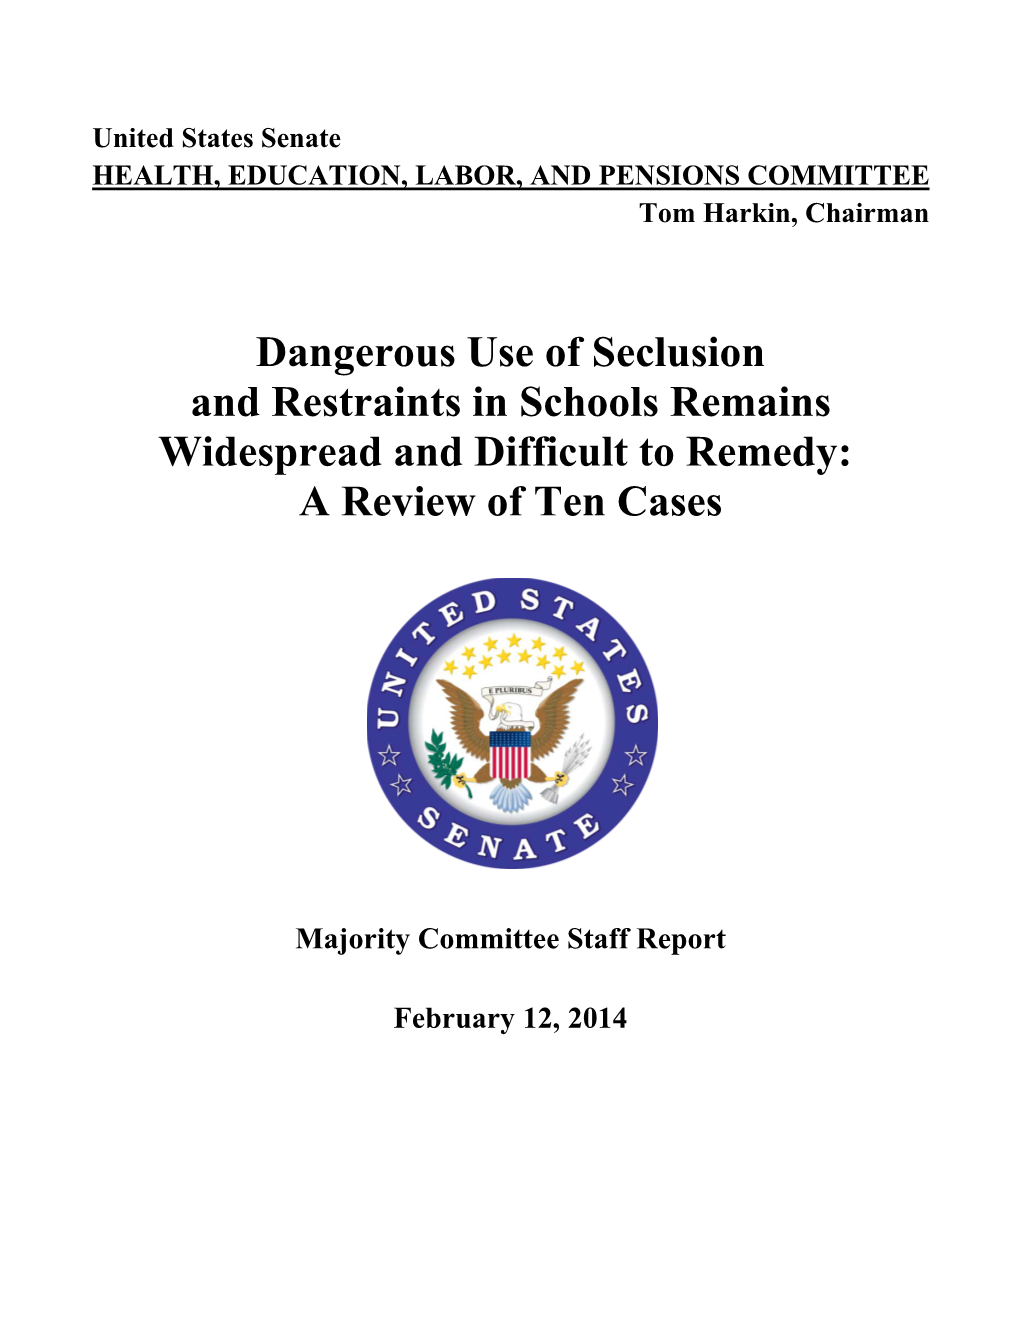 Dangerous Use of Seclusion and Restraints in Schools Remains Widespread and Difficult to Remedy: a Review of Ten Cases